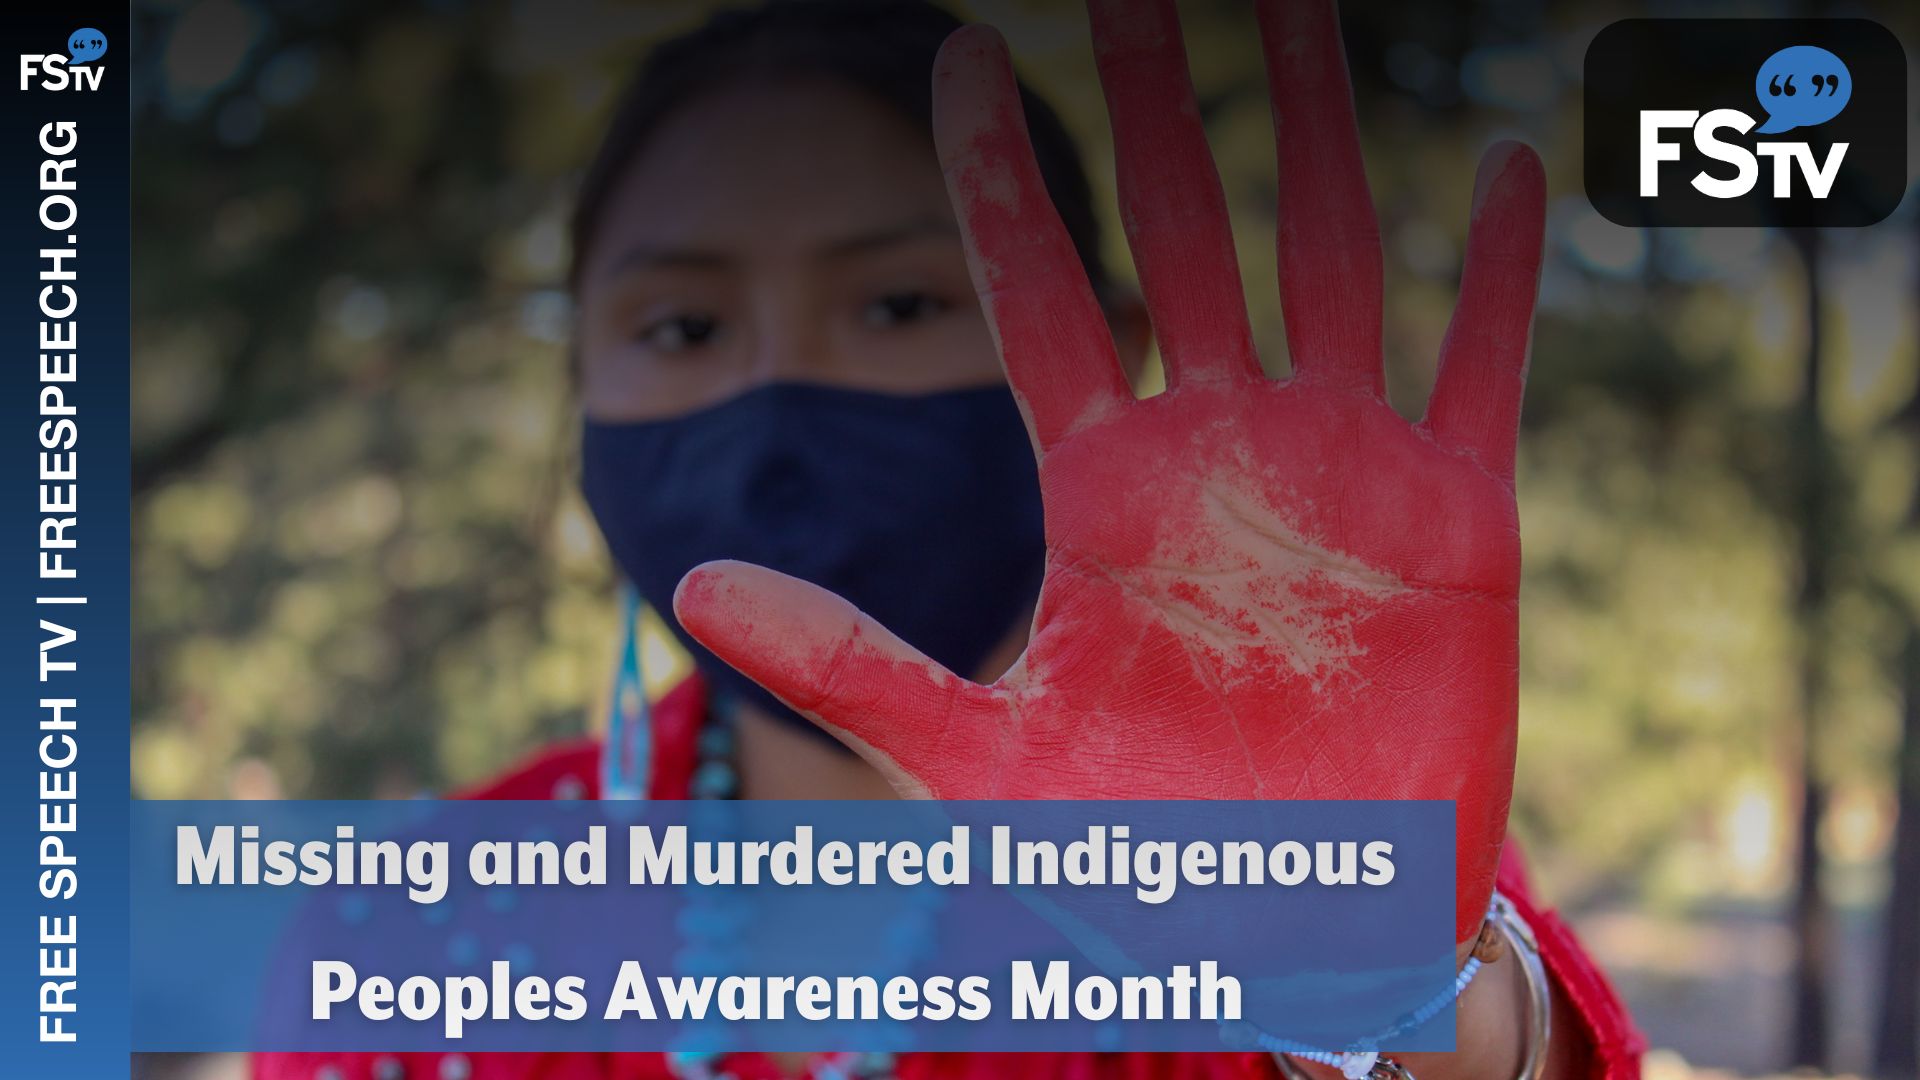 FSTV Speaks |  Missing and Murdered Indigenous Peoples Awareness Month